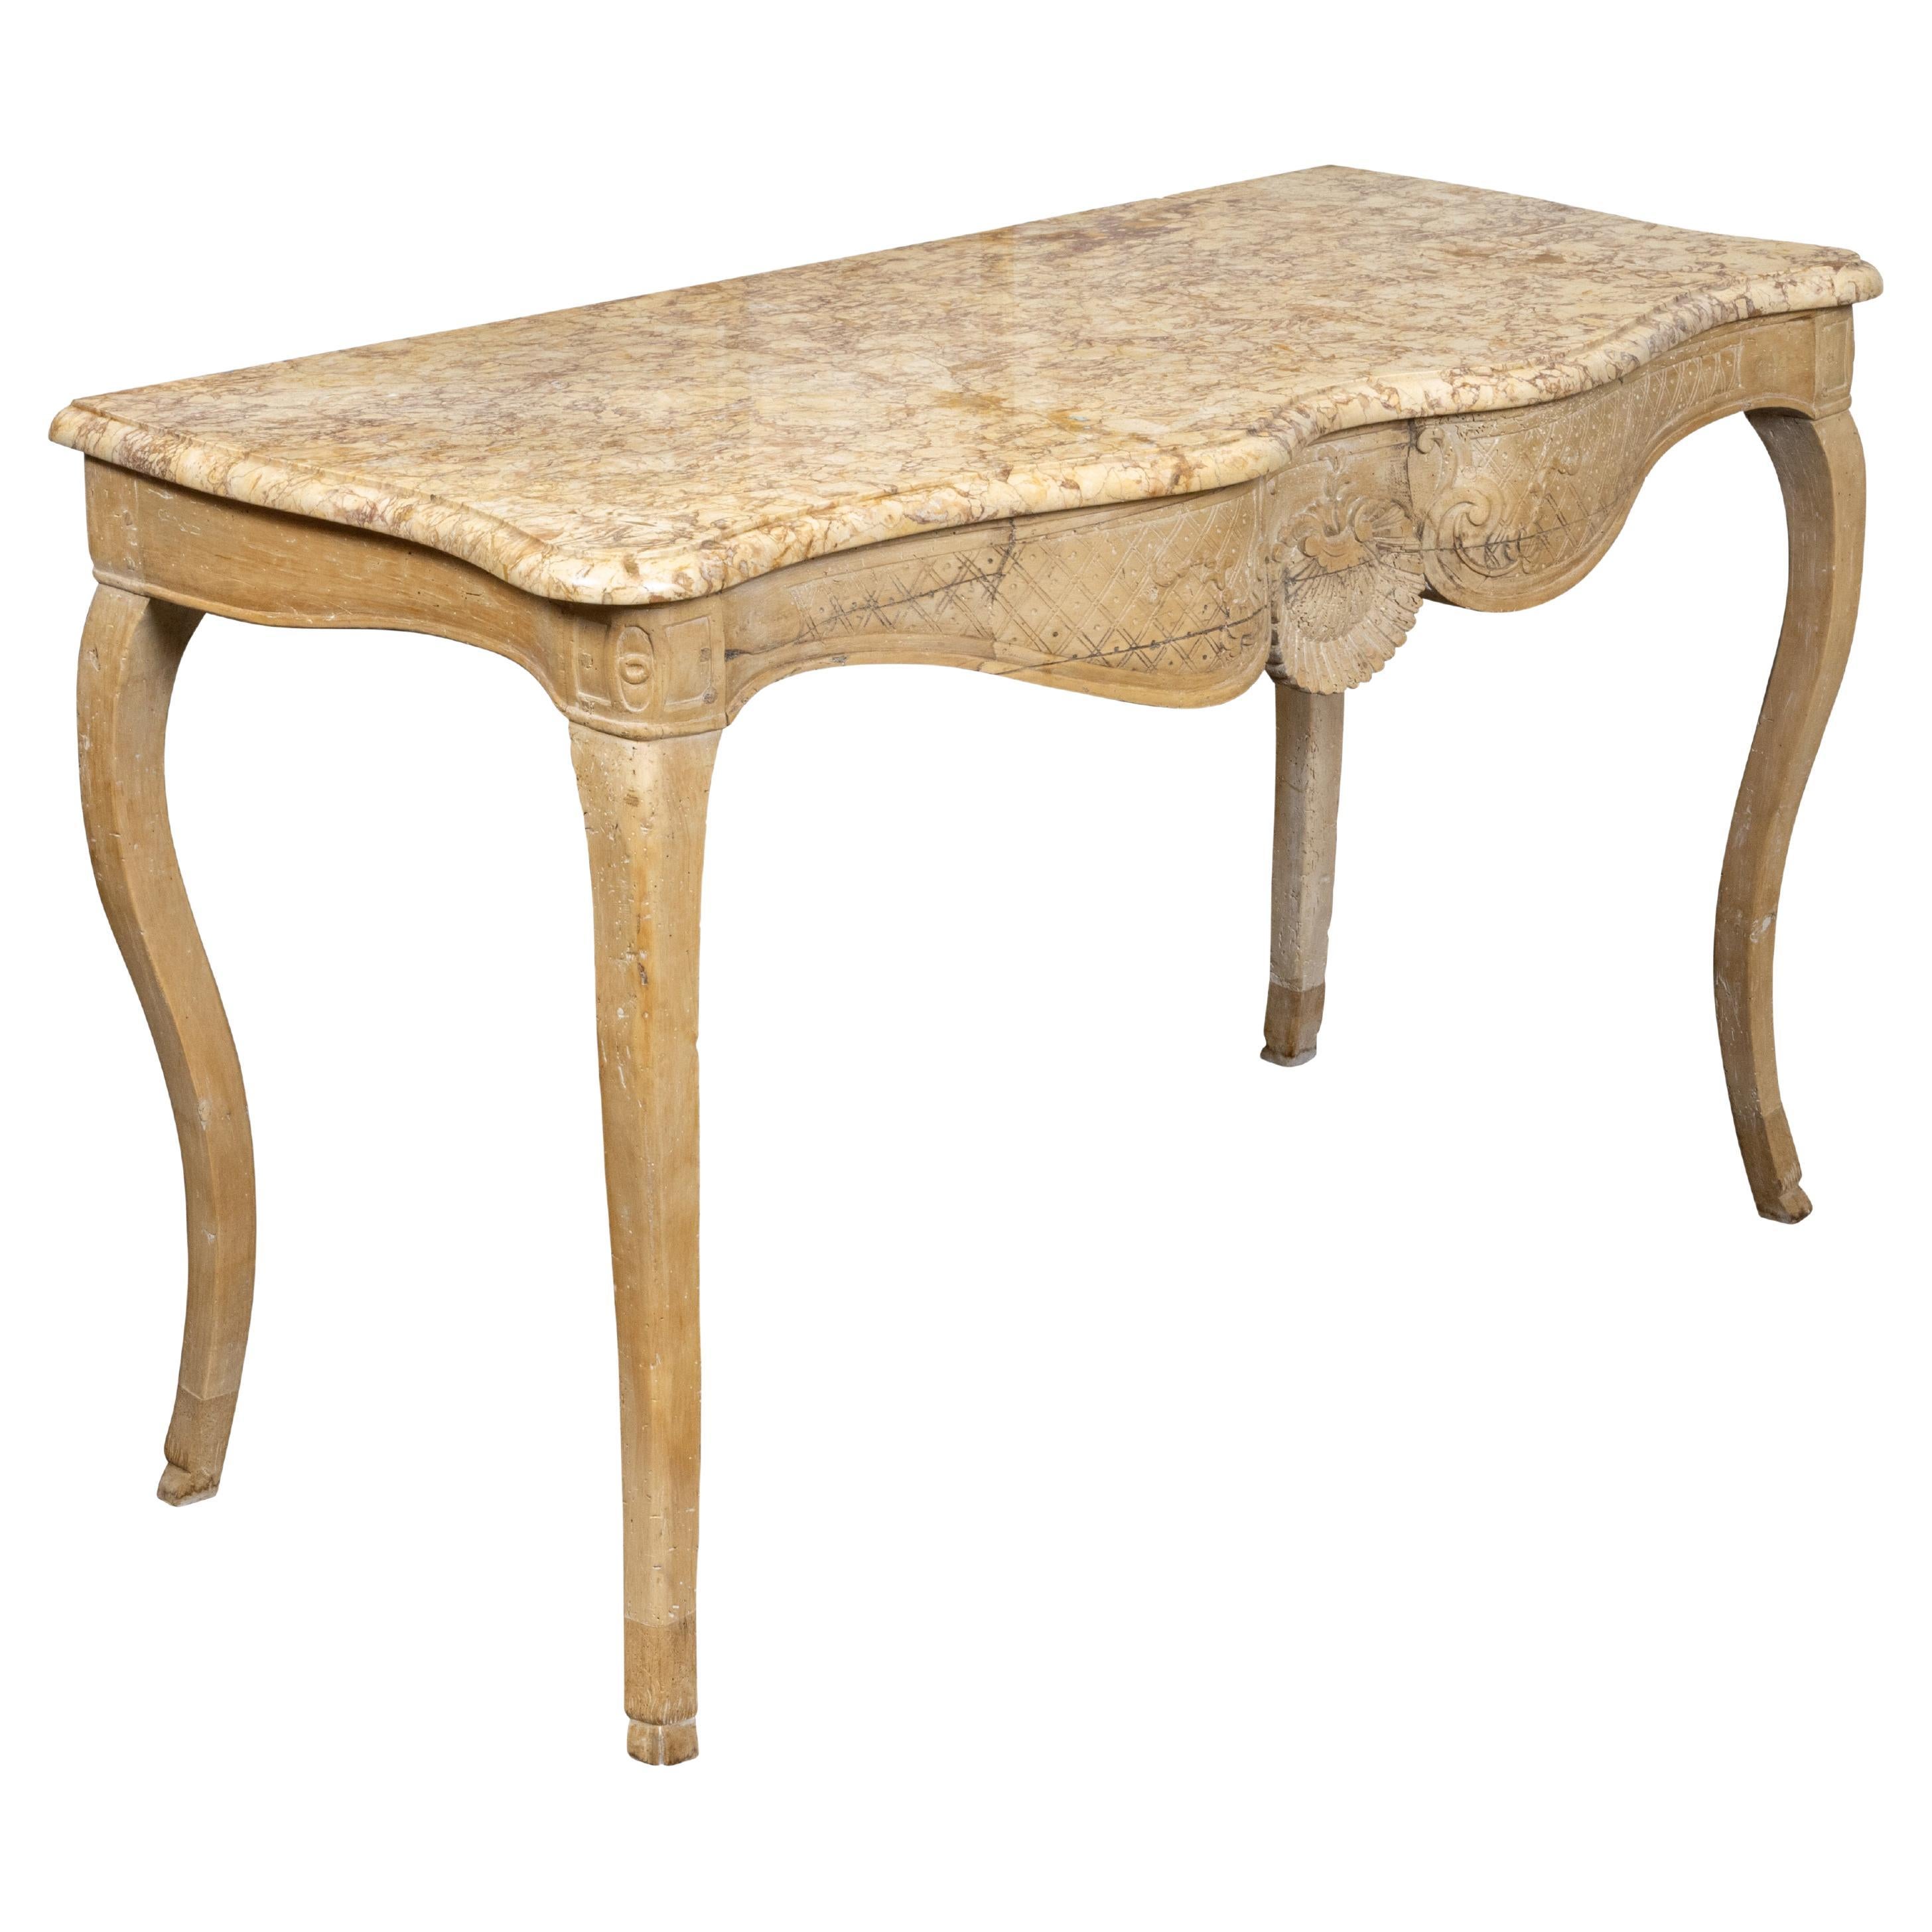 French Rococo 18th Century Beech Wood Marble Top Console Table with Carved Apron For Sale